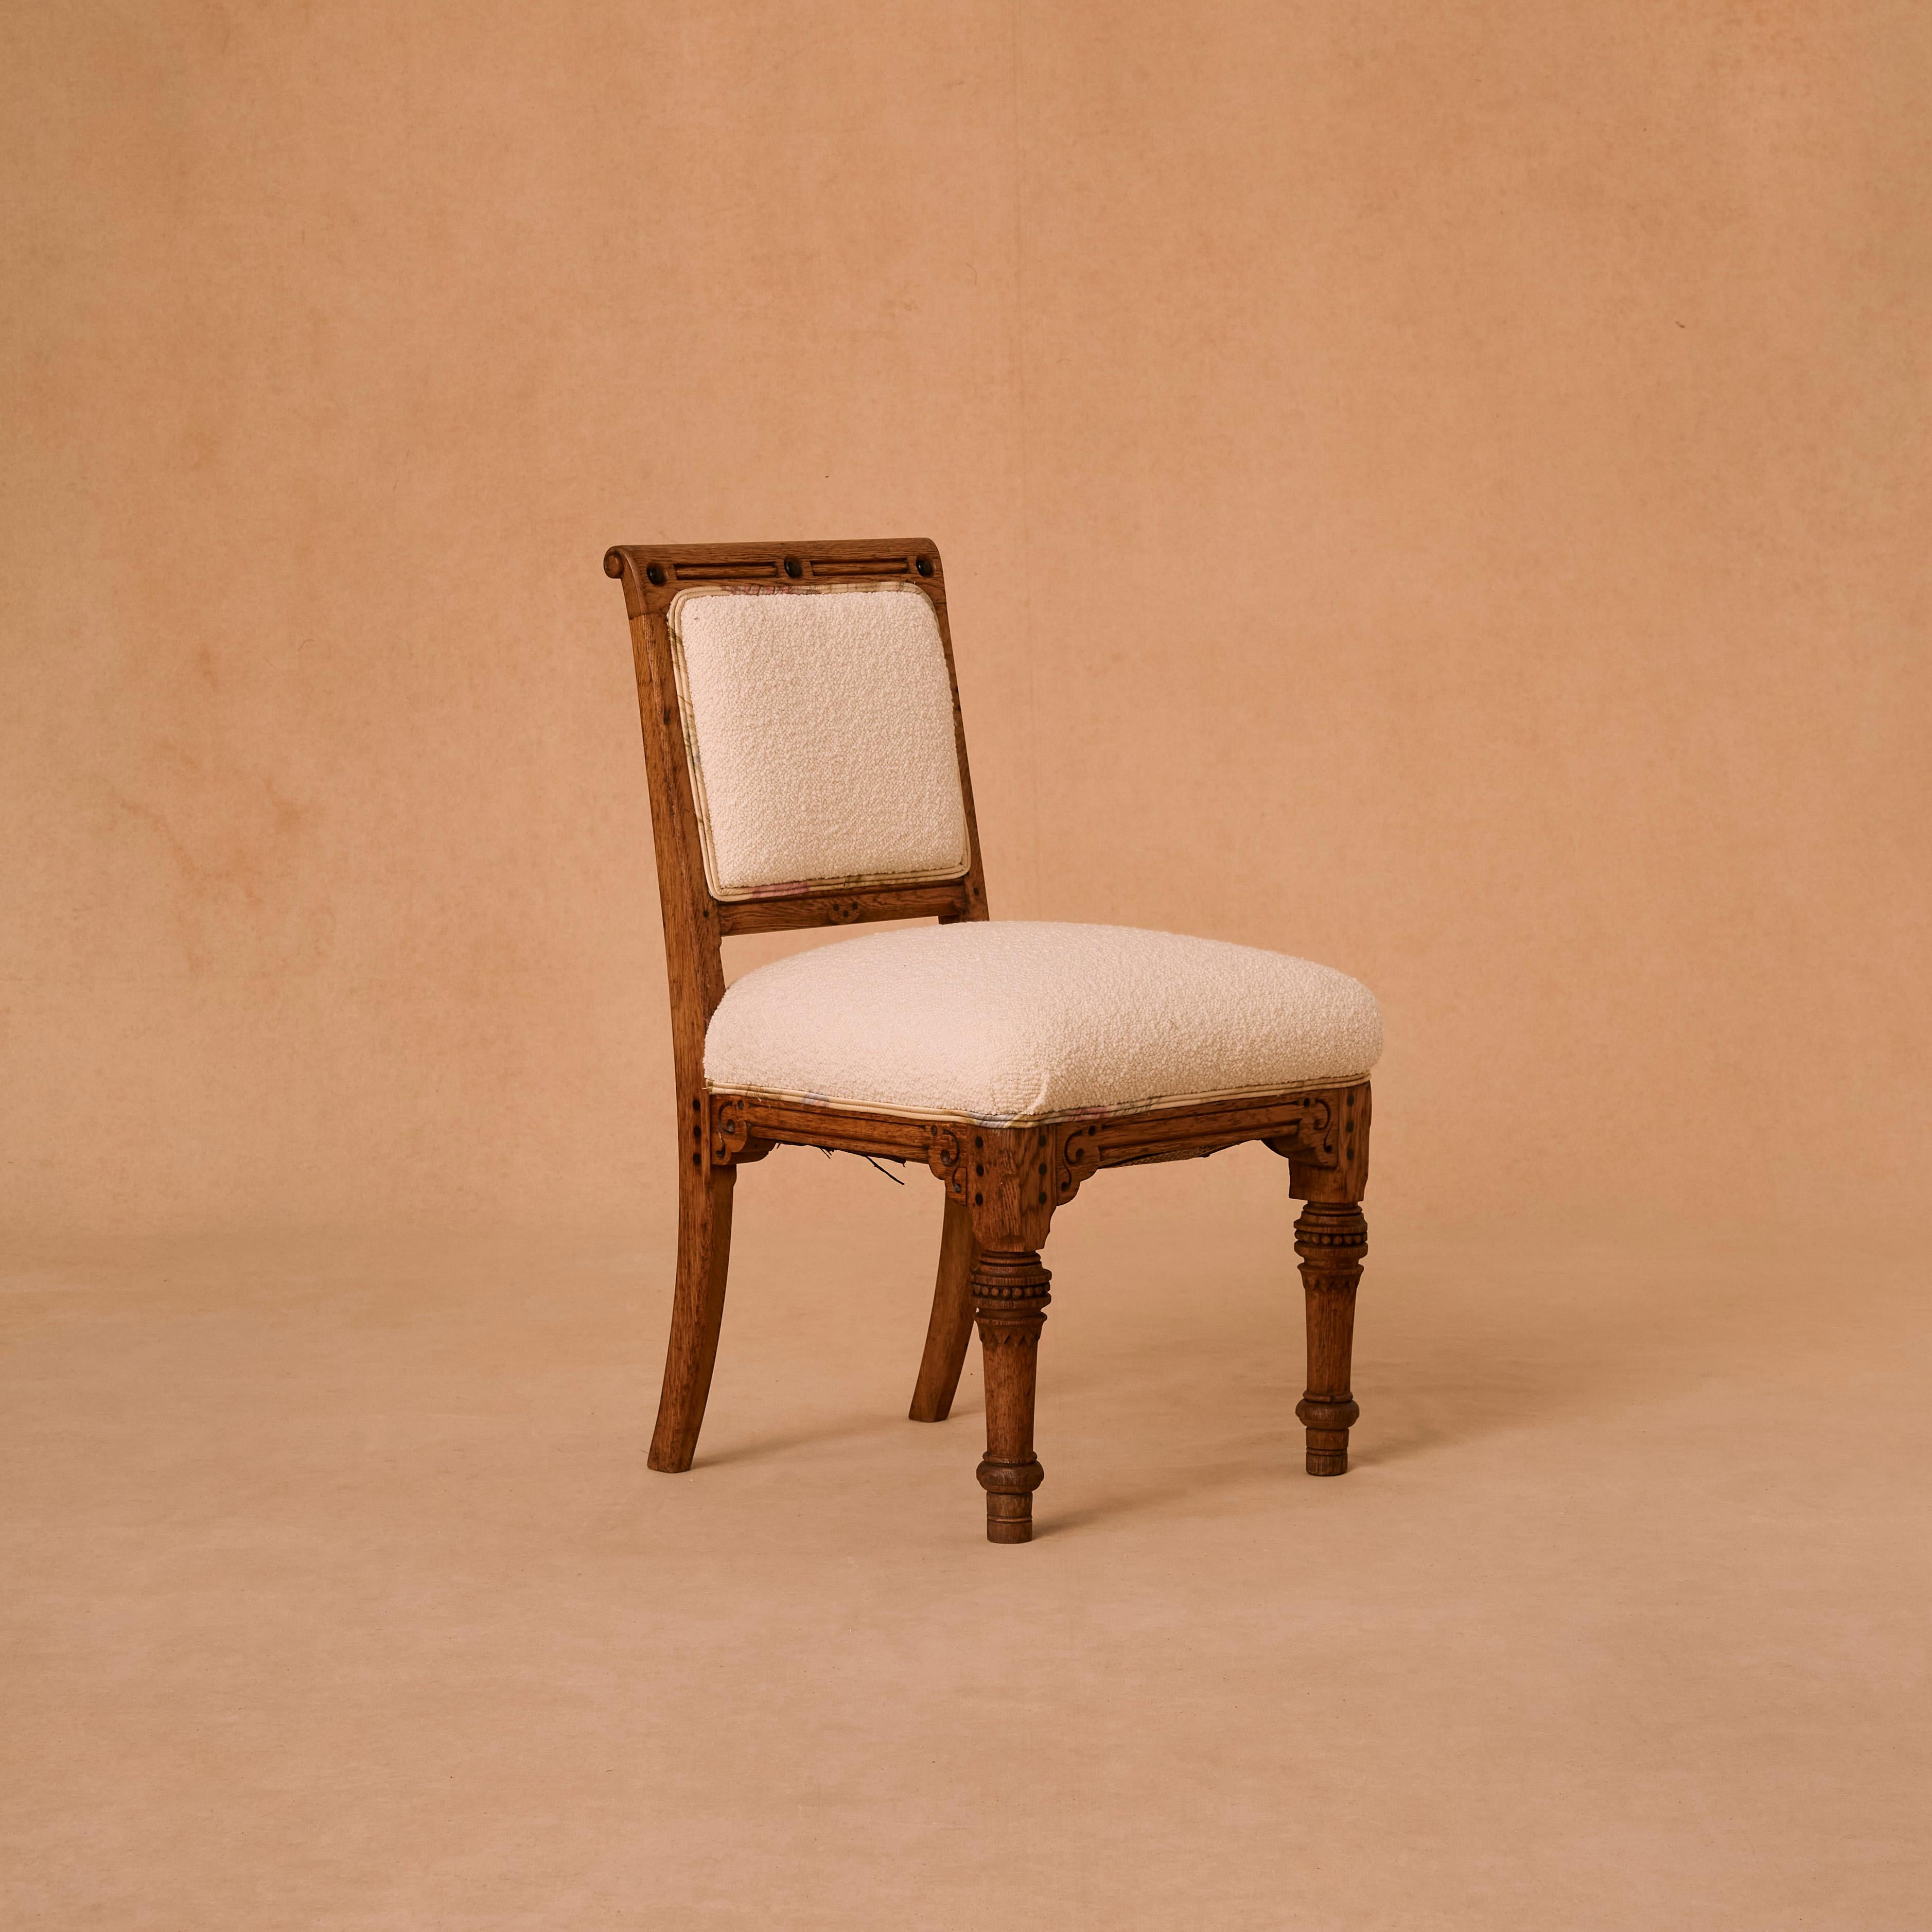 Antique chair wooden chair circa 1930s reupholstered in ivory boucle fabric.